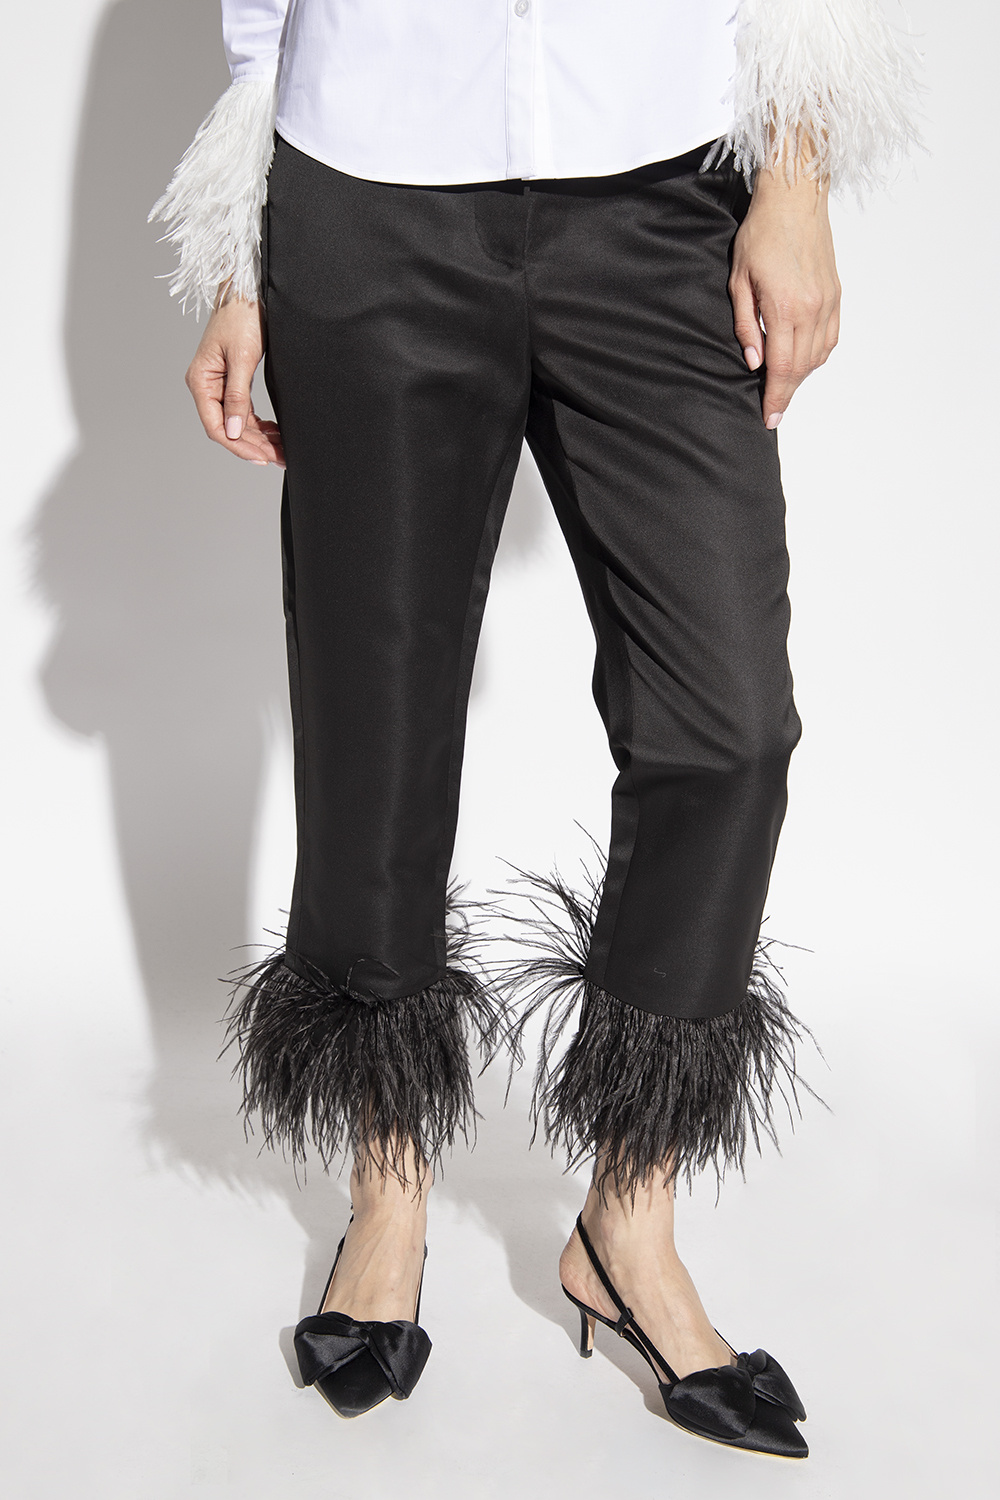 Kate Spade Dianella trousers with feathers